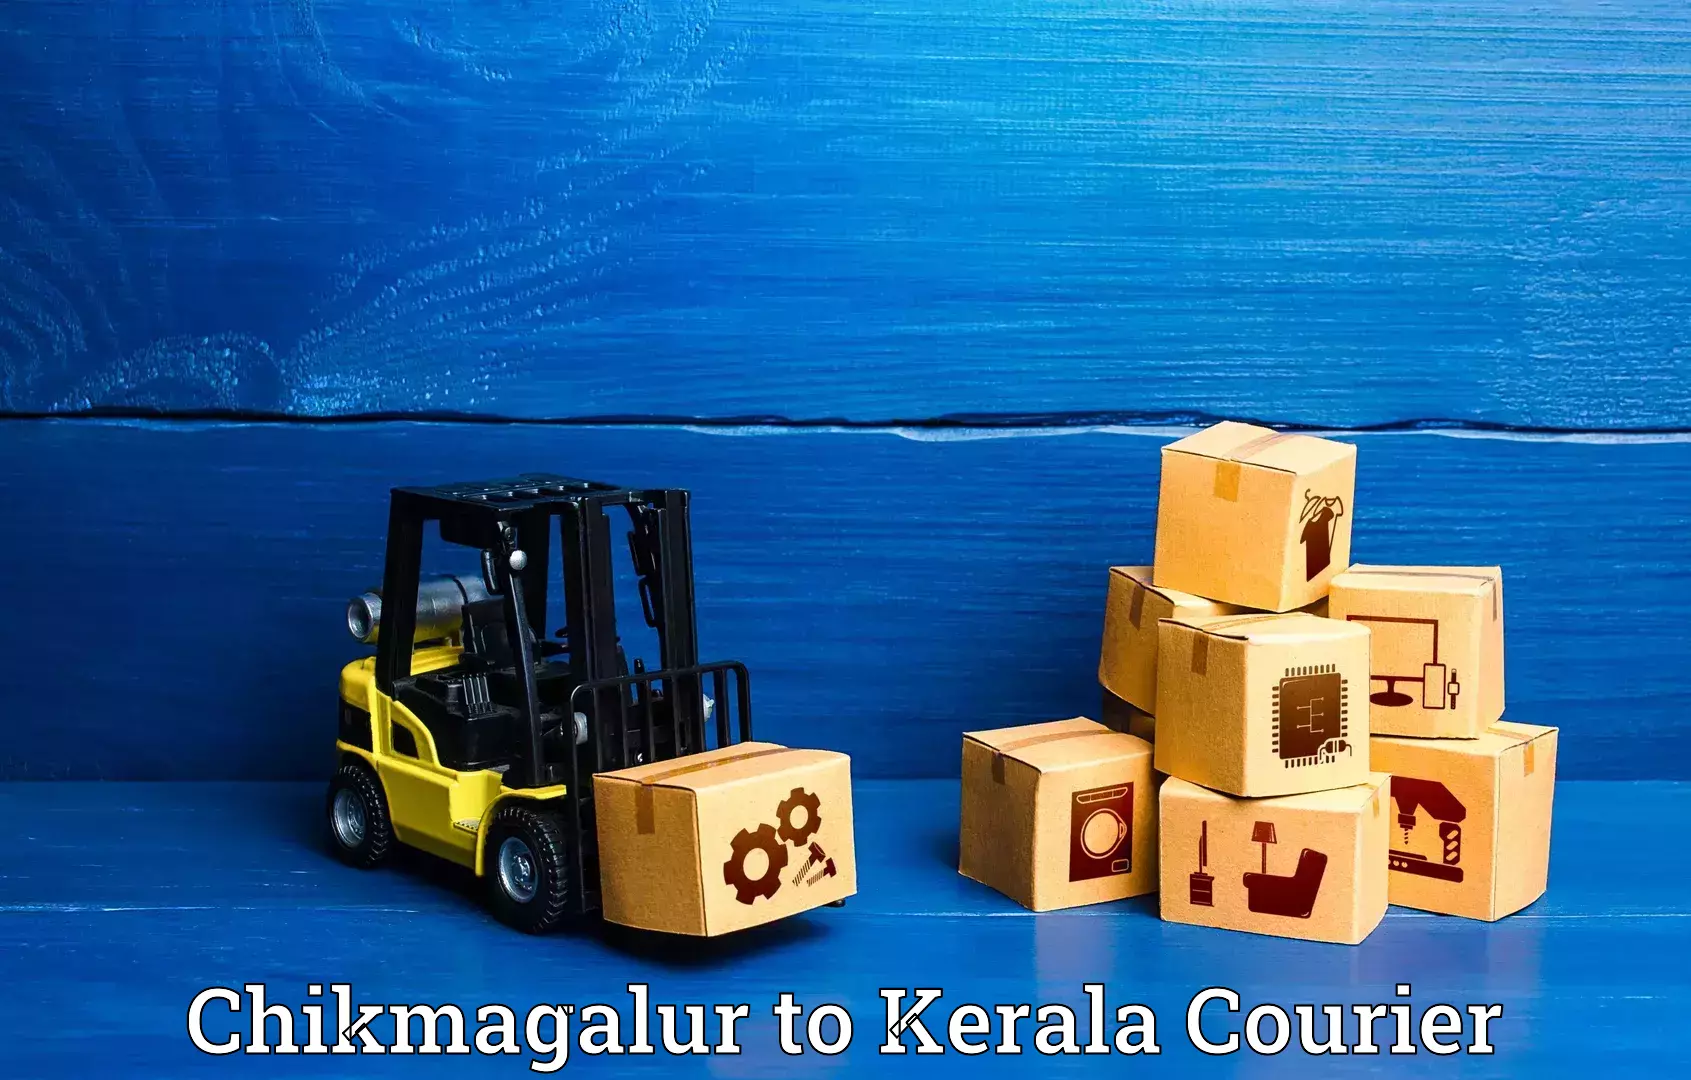 Luggage transport company Chikmagalur to Kerala